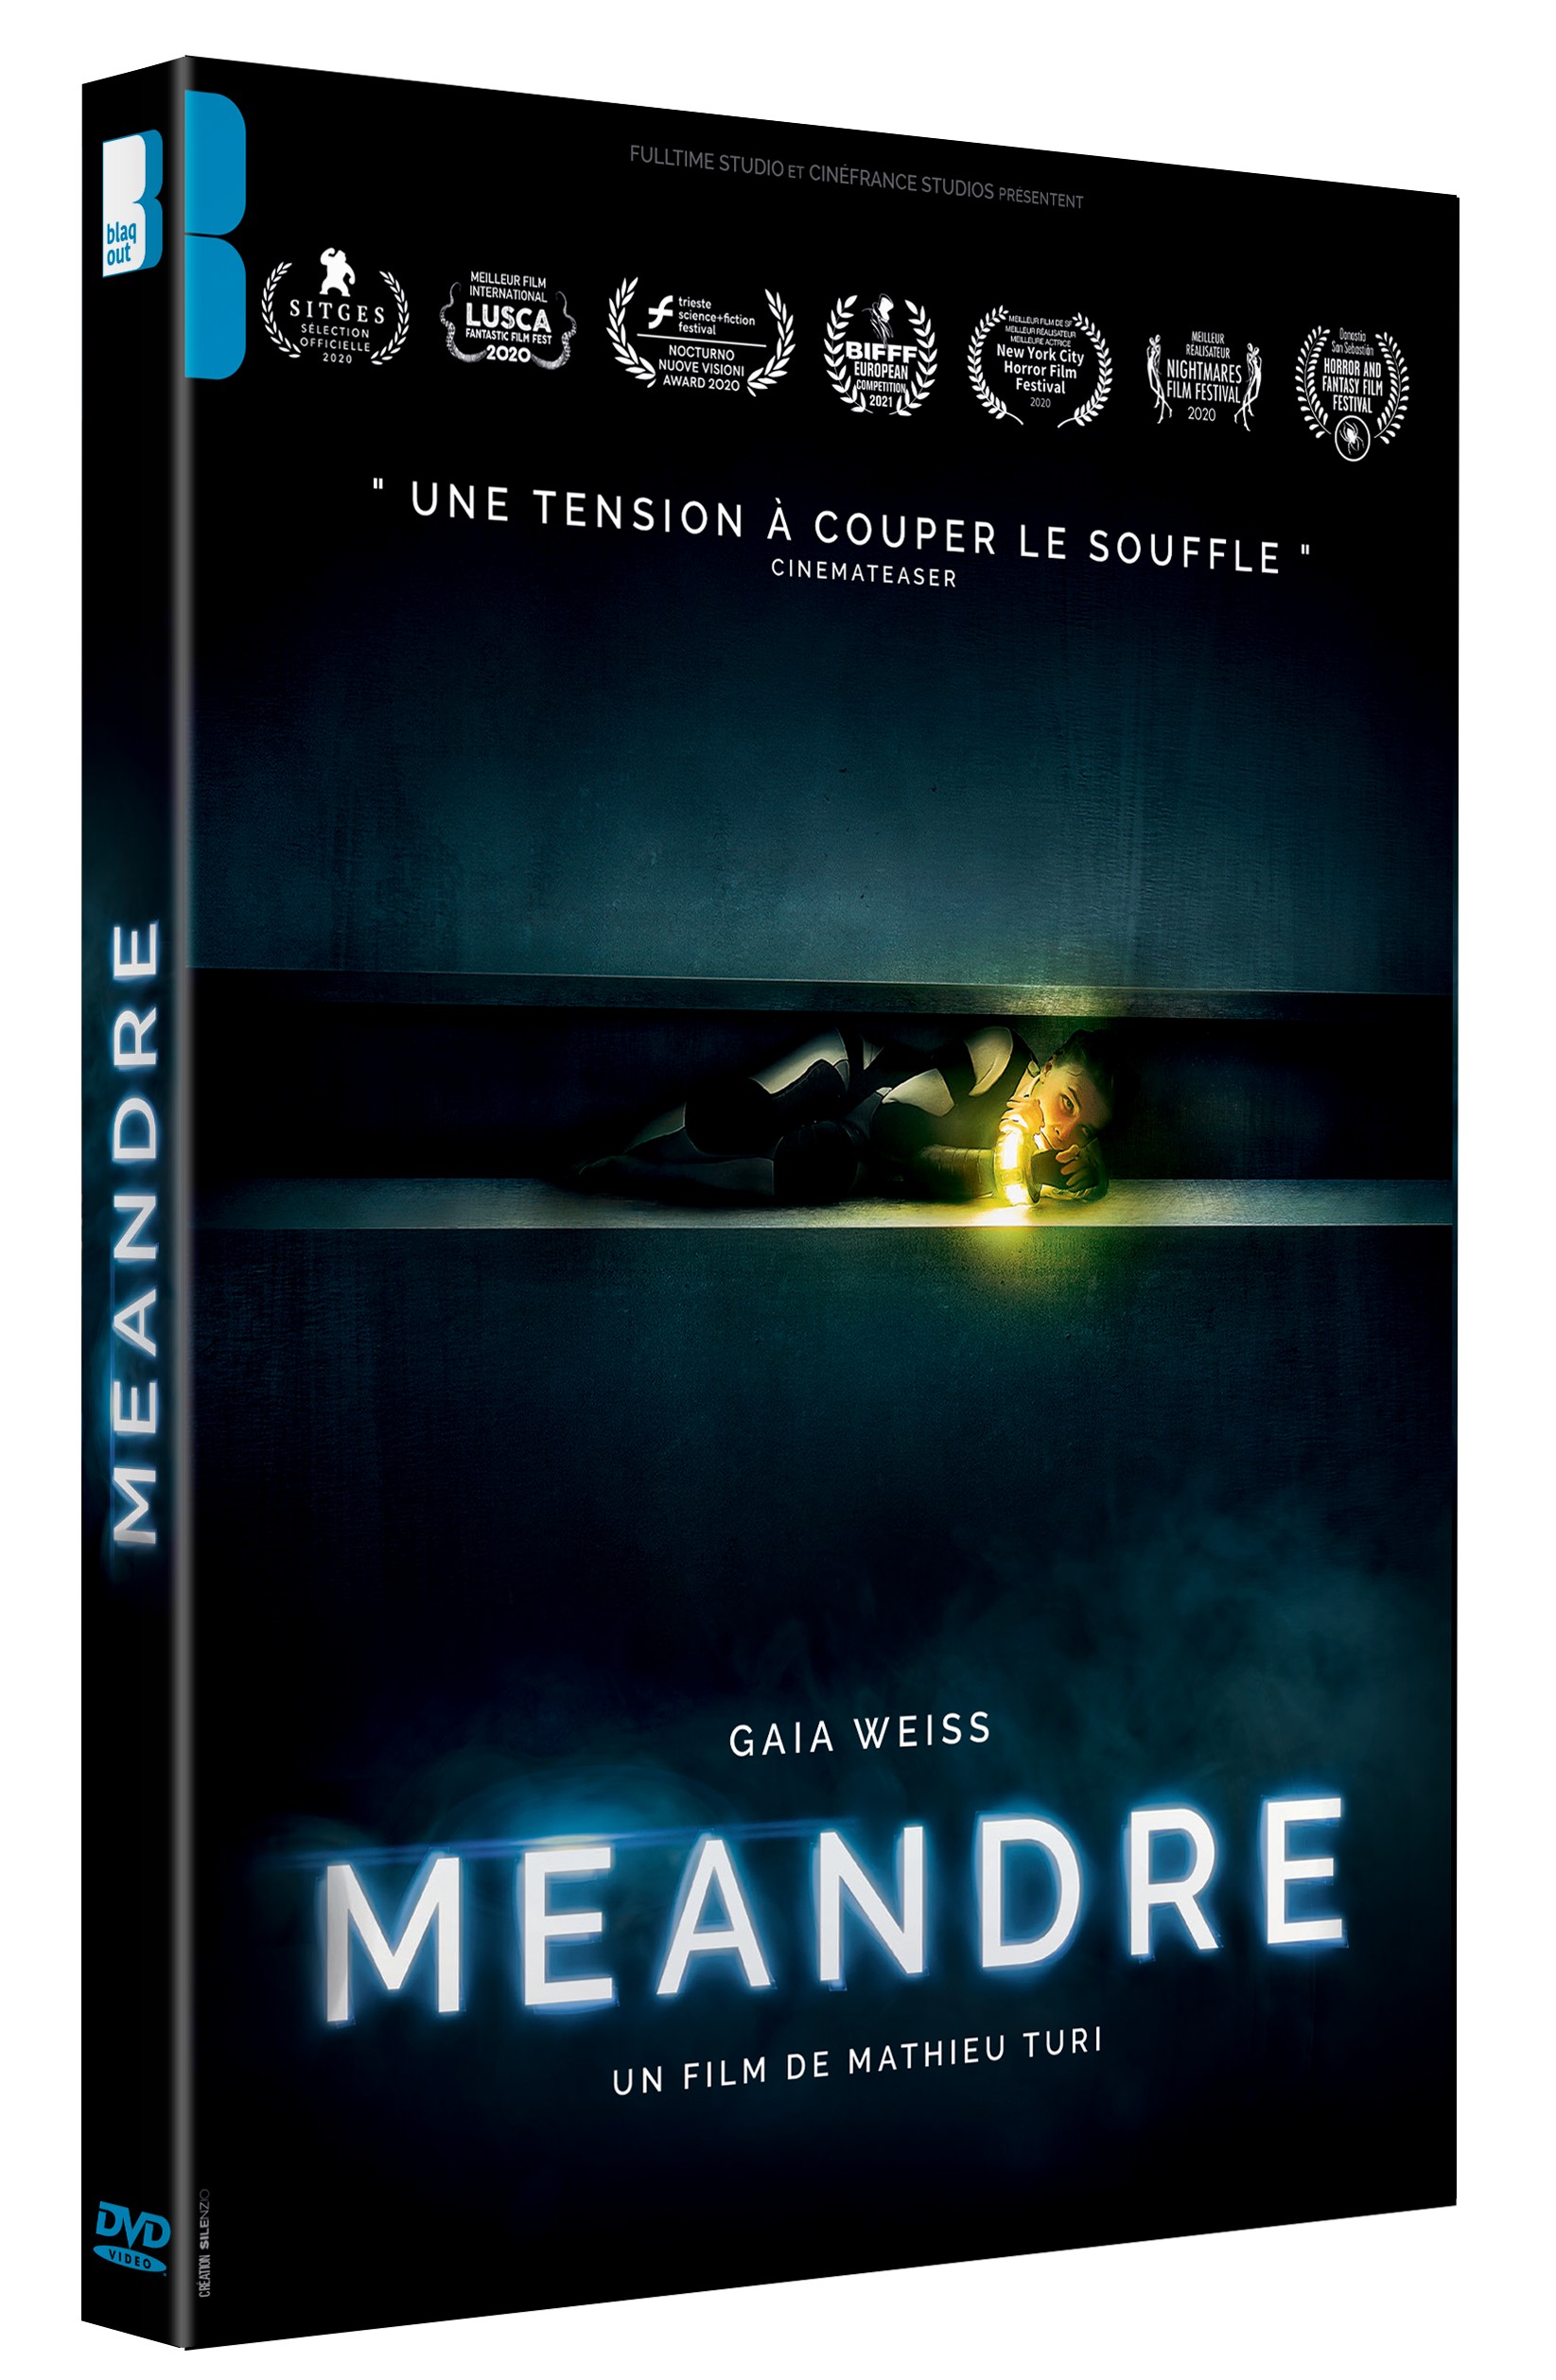 MEANDRE